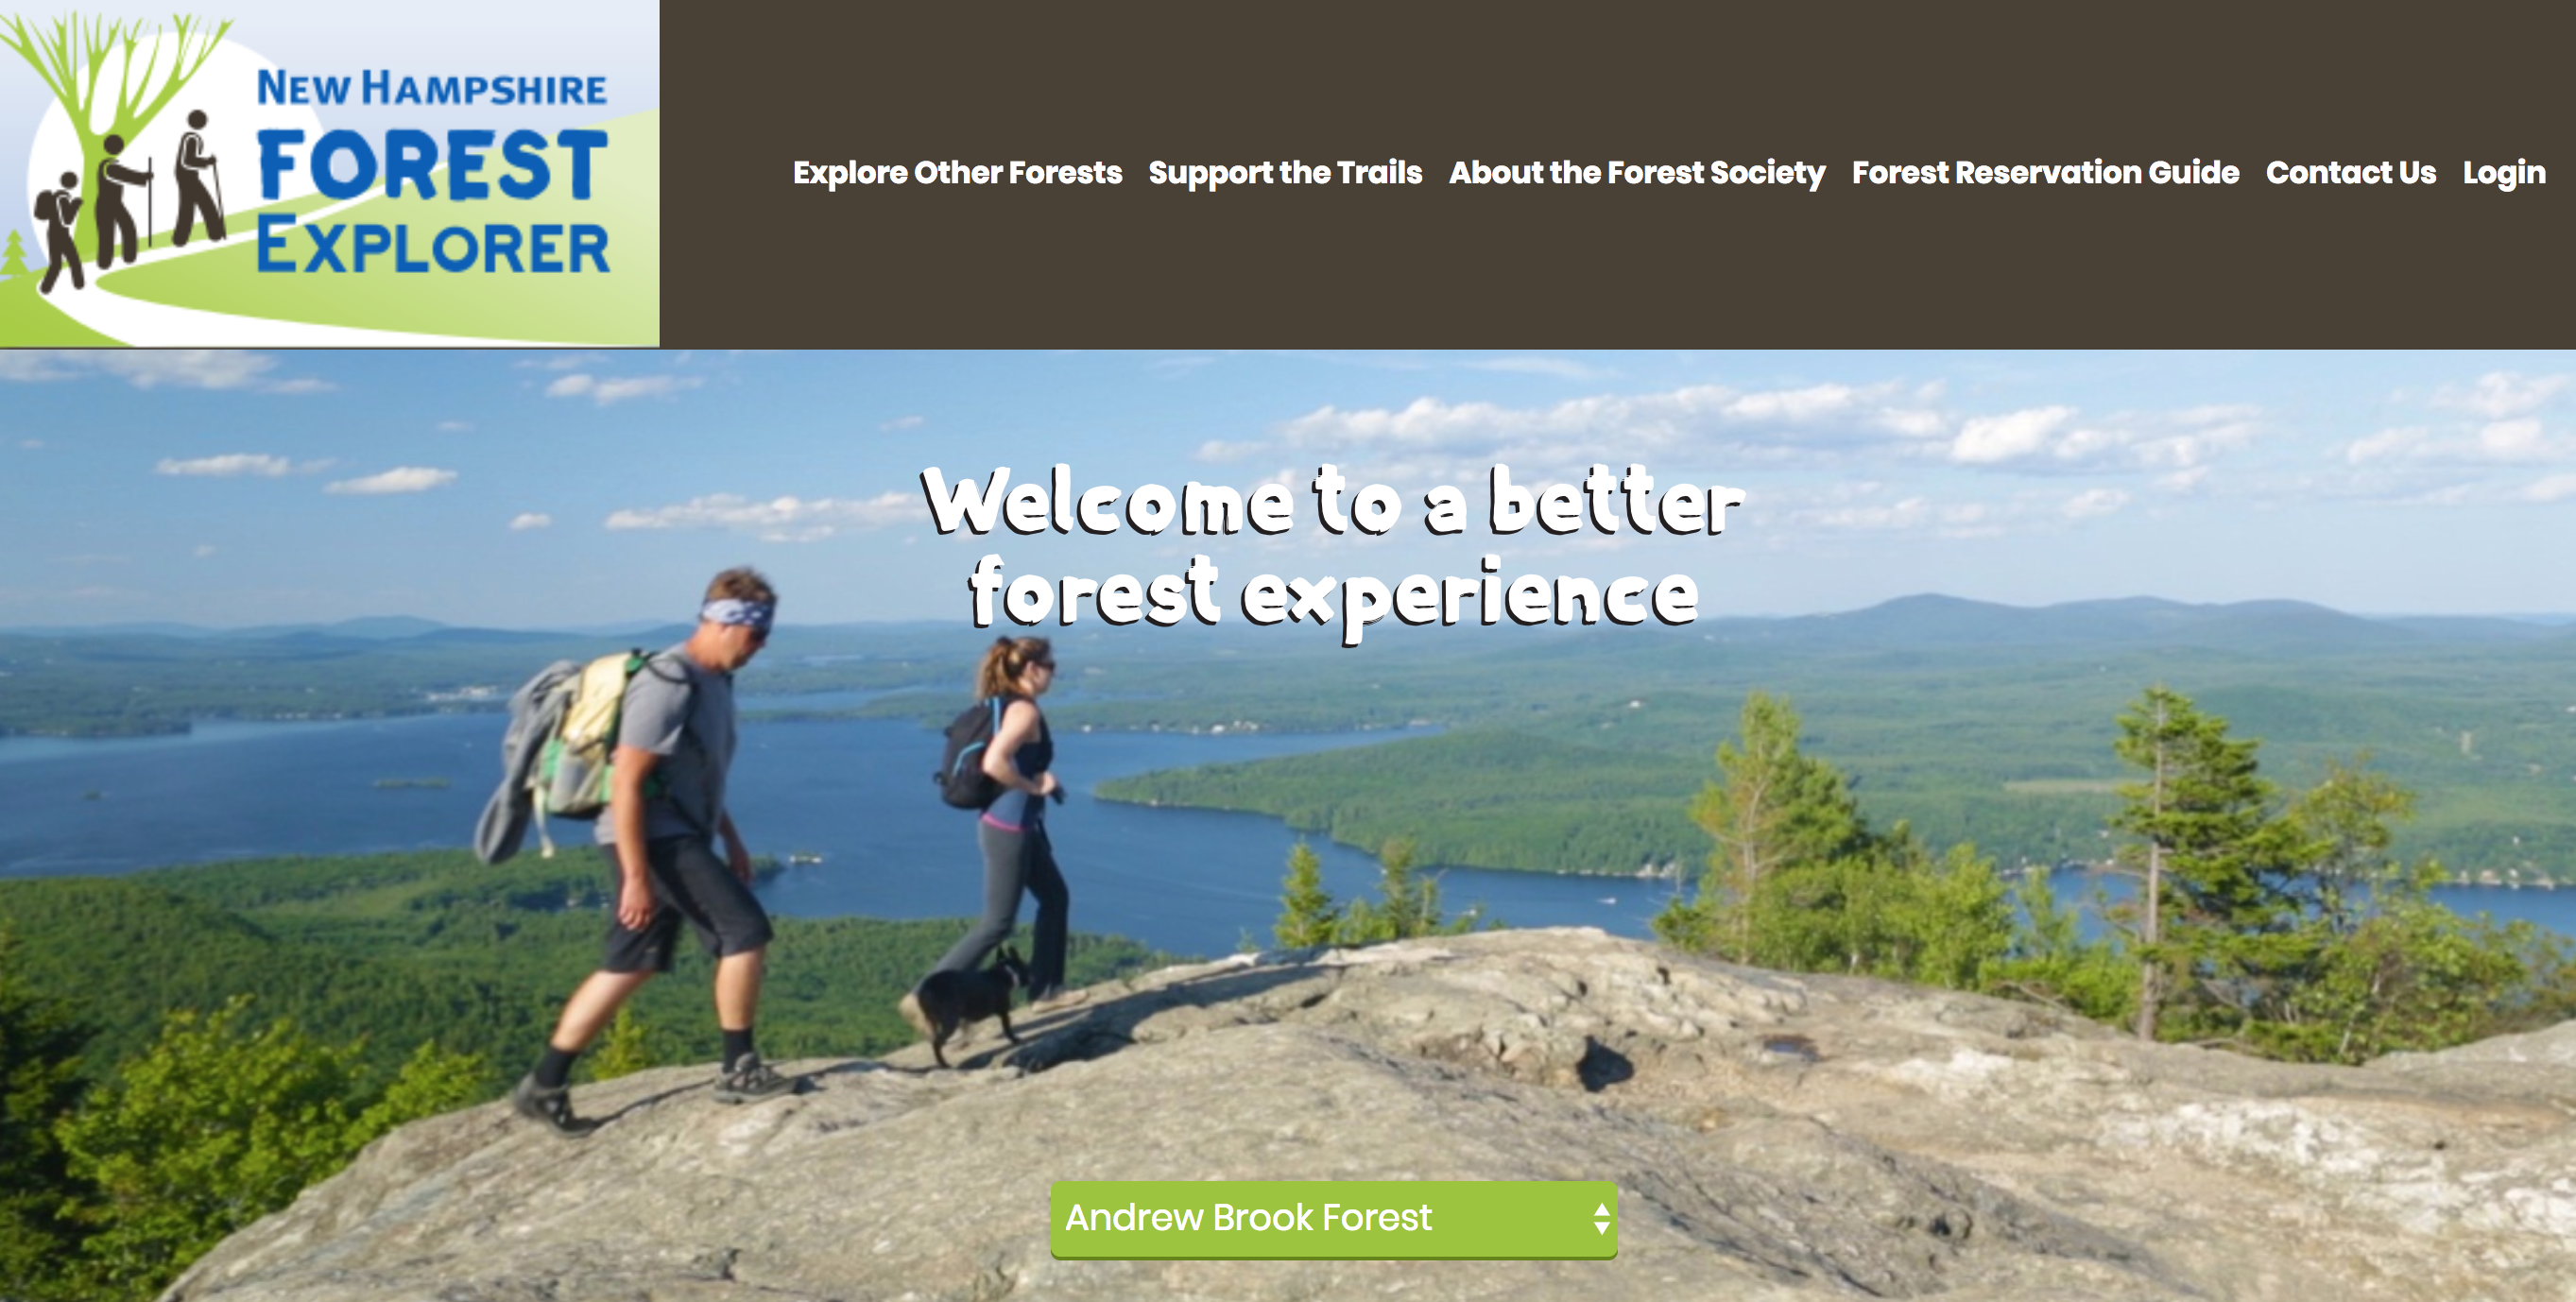 Forest Explorer App from the Society for the Protection of New Hampshire Forests image